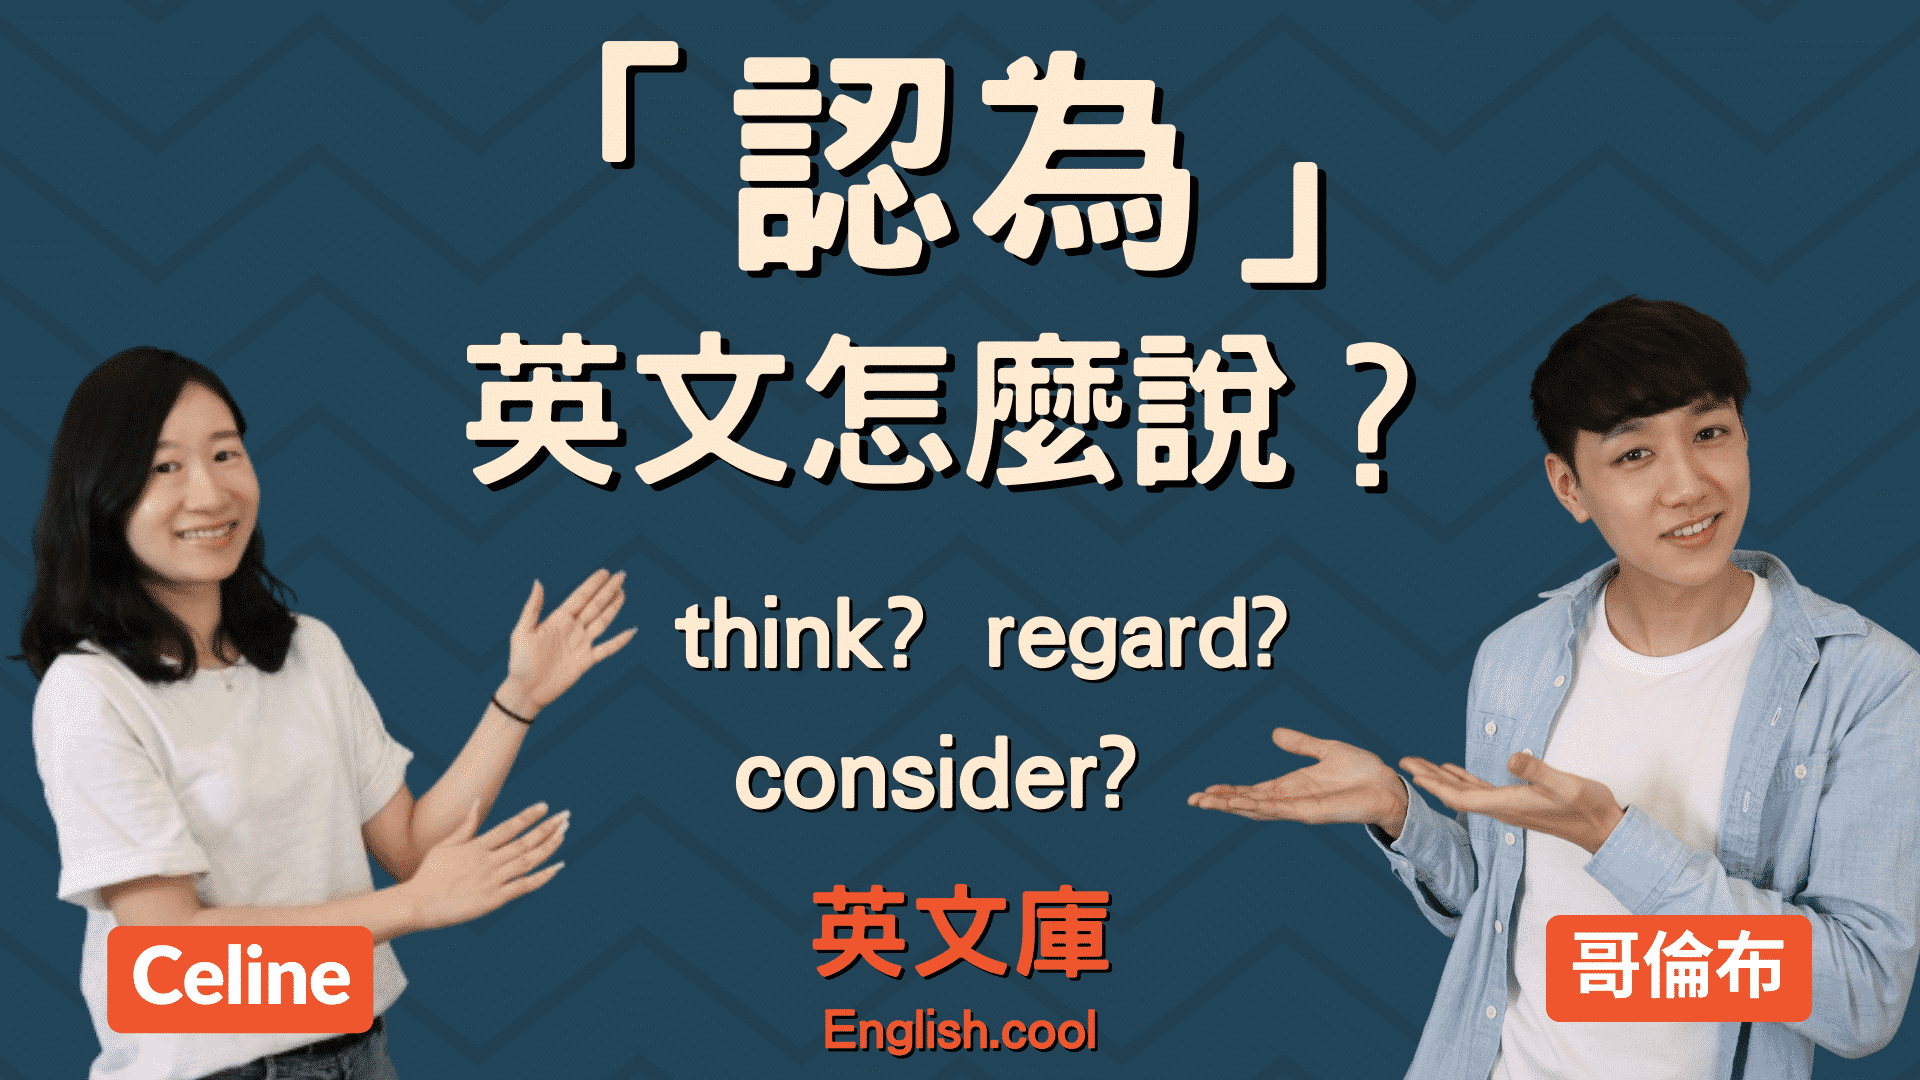 You are currently viewing 「認為」英文是什麼？think? consider? regard?